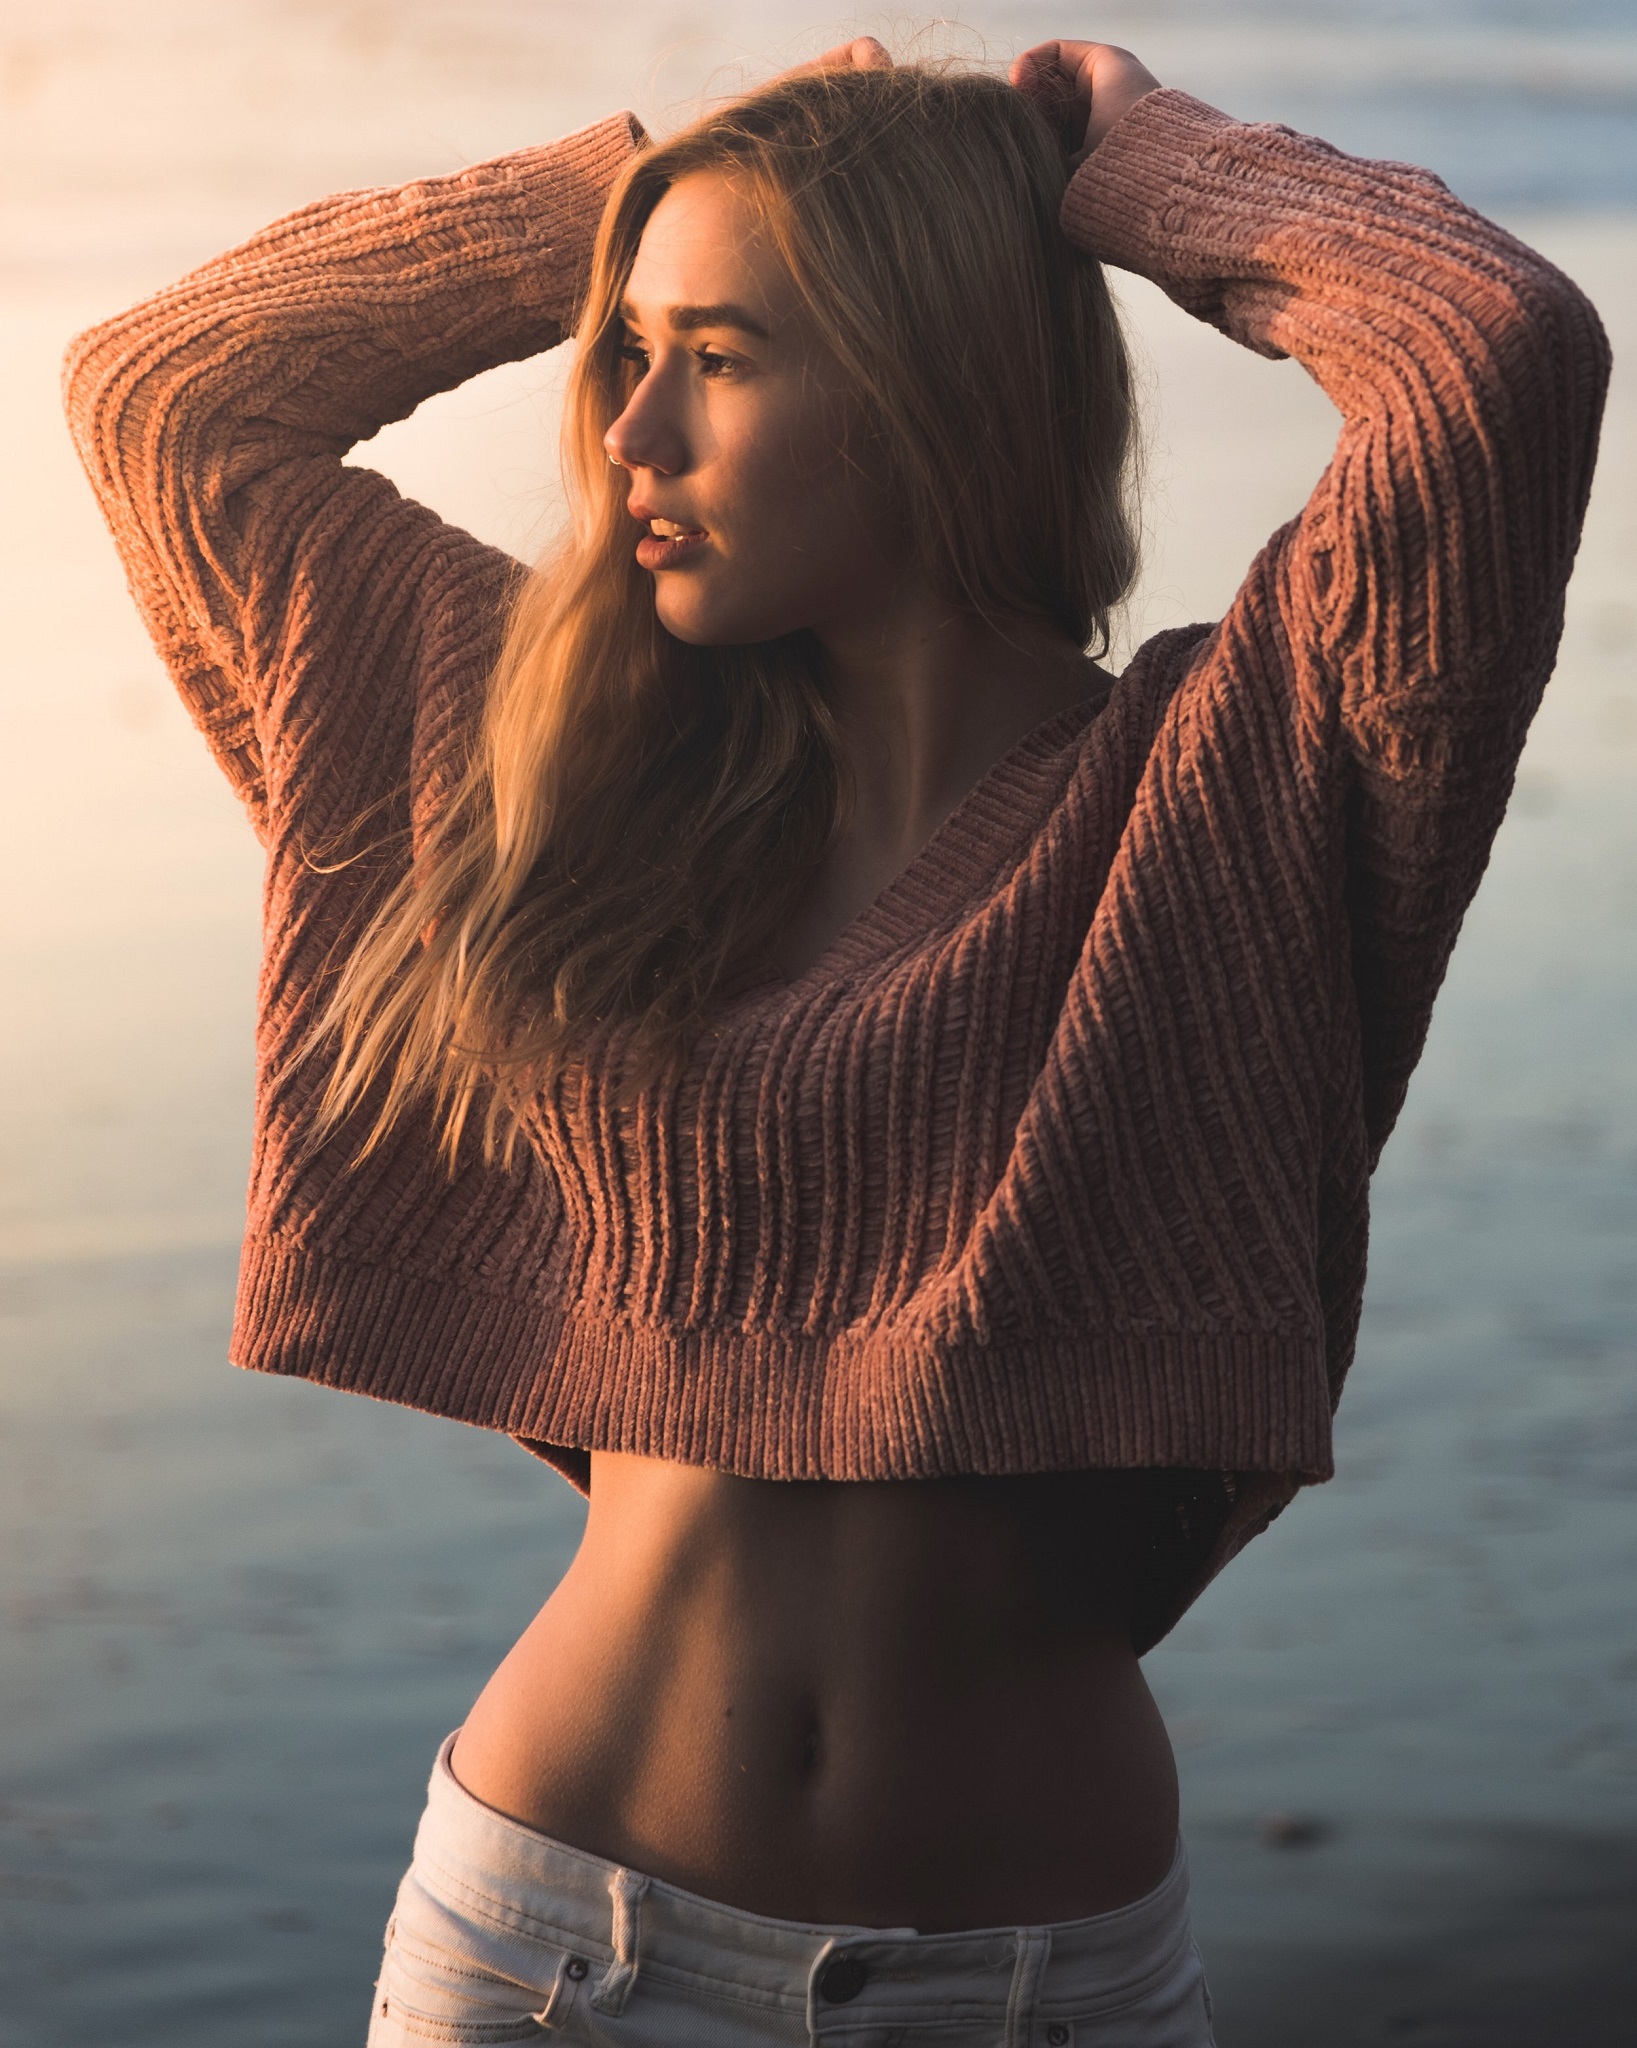 Carly Belle Blonde Women Model Jeans Portrait Sweater Looking Into The Distance Nose Rings Hands On  1637x2048